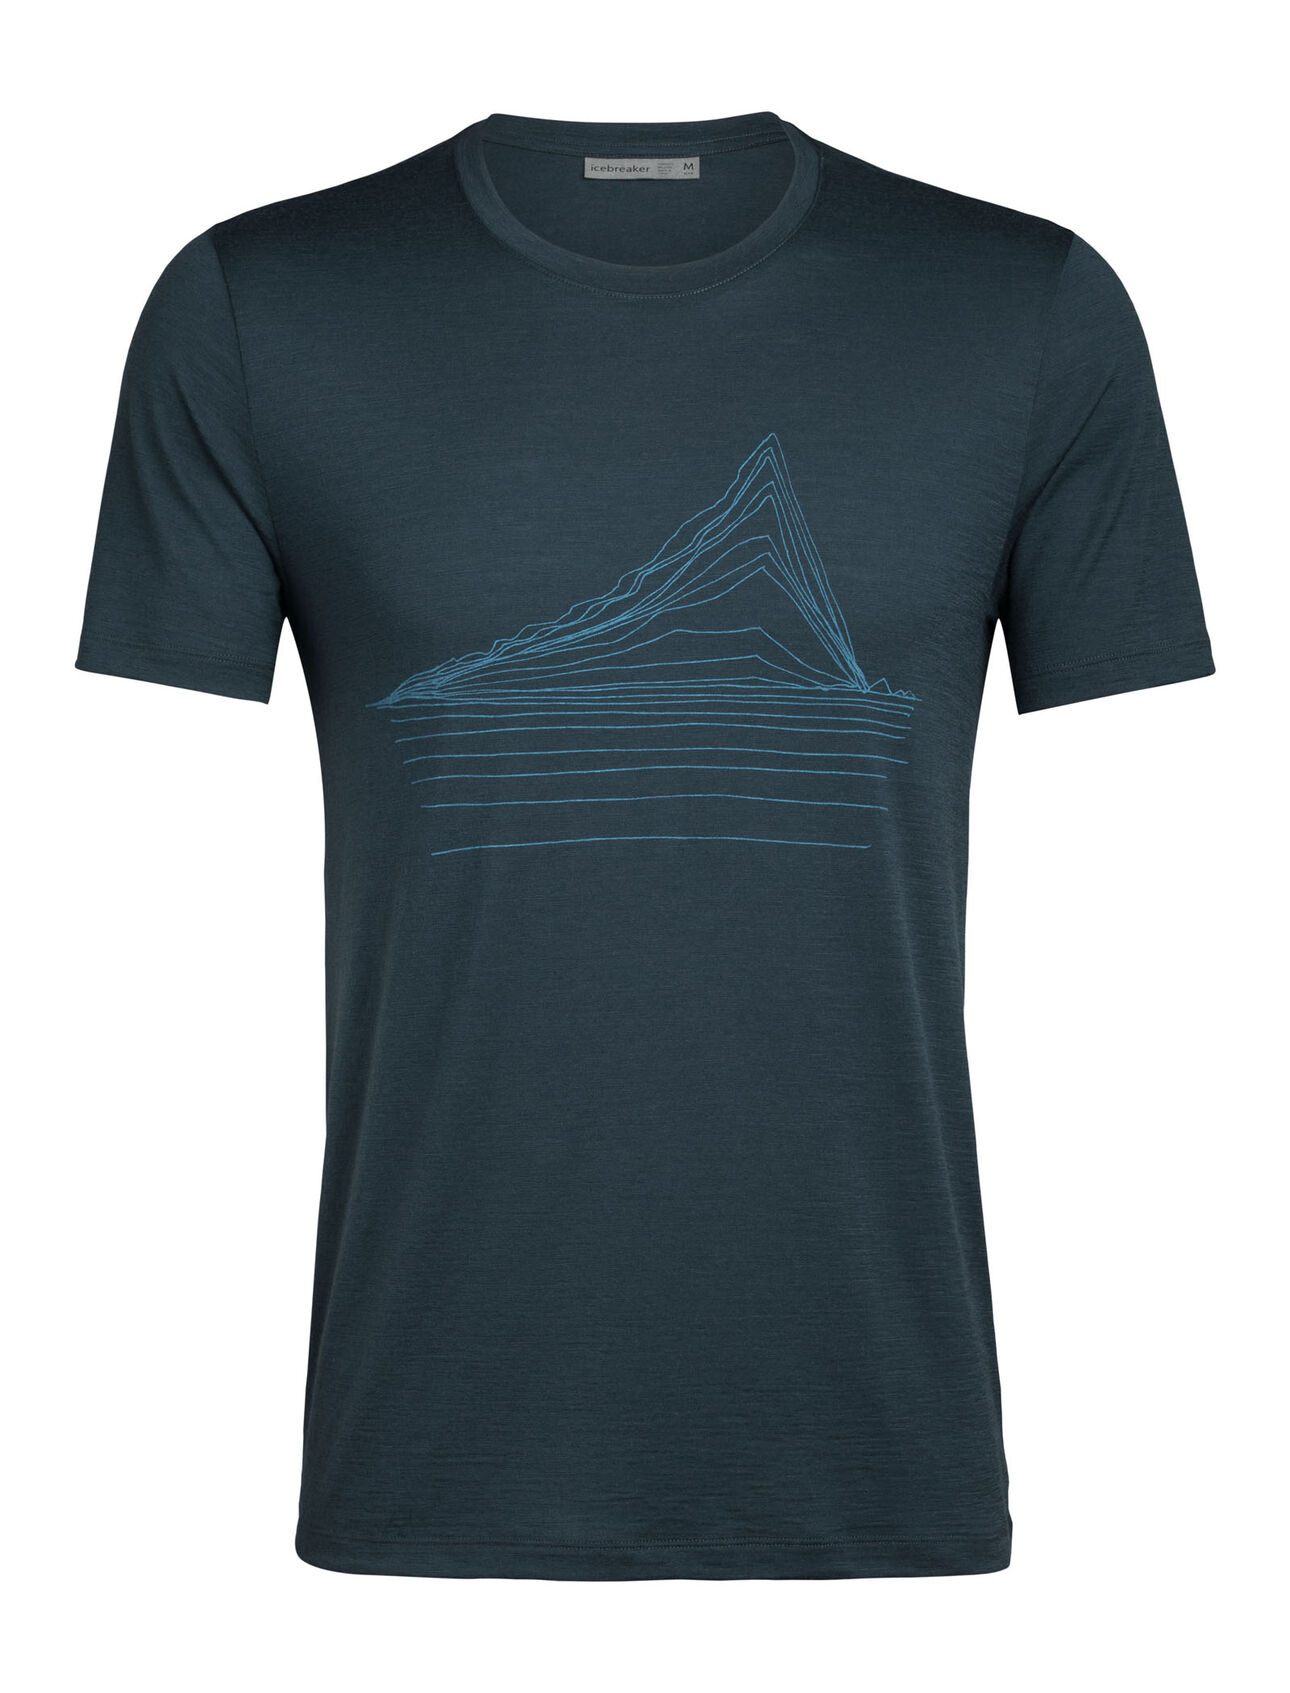 dla mężczyzn Merino Tech Lite Short Sleeve Crewe T-Shirt Heating Up Our most versatile tech tee, in breathable, odor-resistant merino wool with a slight stretch. Artist William Carden-Horton creates a striking image of glacial sea ice in his iconic line-drawing style.